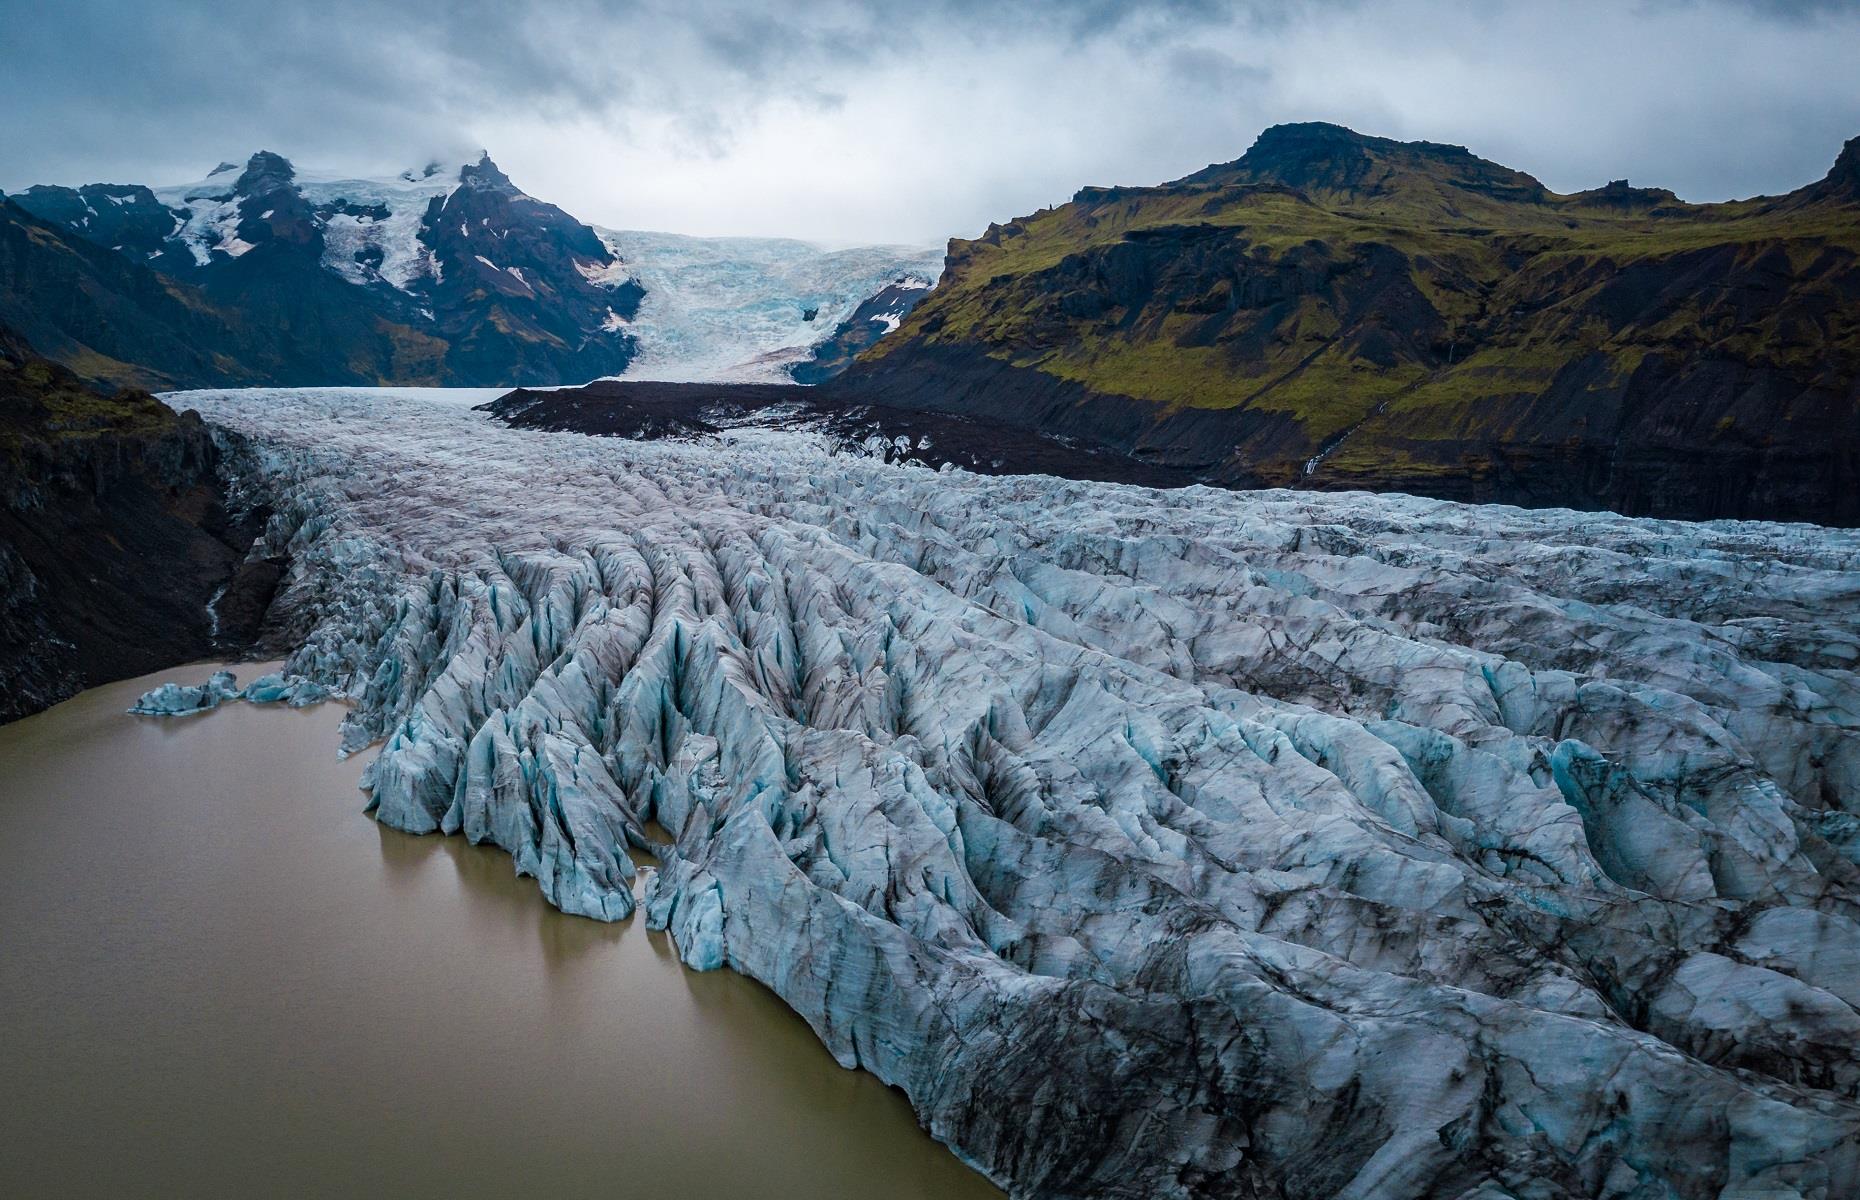 <p>Savvy film and TV fans may recognize Svínafellsjökull from the likes of <em>Game of Thrones</em>, <em>Batman Begins</em> and <em>Interstellar</em>. Yet the majesty of this glacier can only really be experienced in person. An outlet glacier of Vatnajökull, the largest ice cap by volume in Europe, Svínafellsjökull lies inside Skaftafell Nature Reserve. Its dramatic ridges were formed over centuries, thanks to the weight of ice being dragged down the mountain. As far as natural wonders go, Svínafellsjökull is up there with the best.</p>